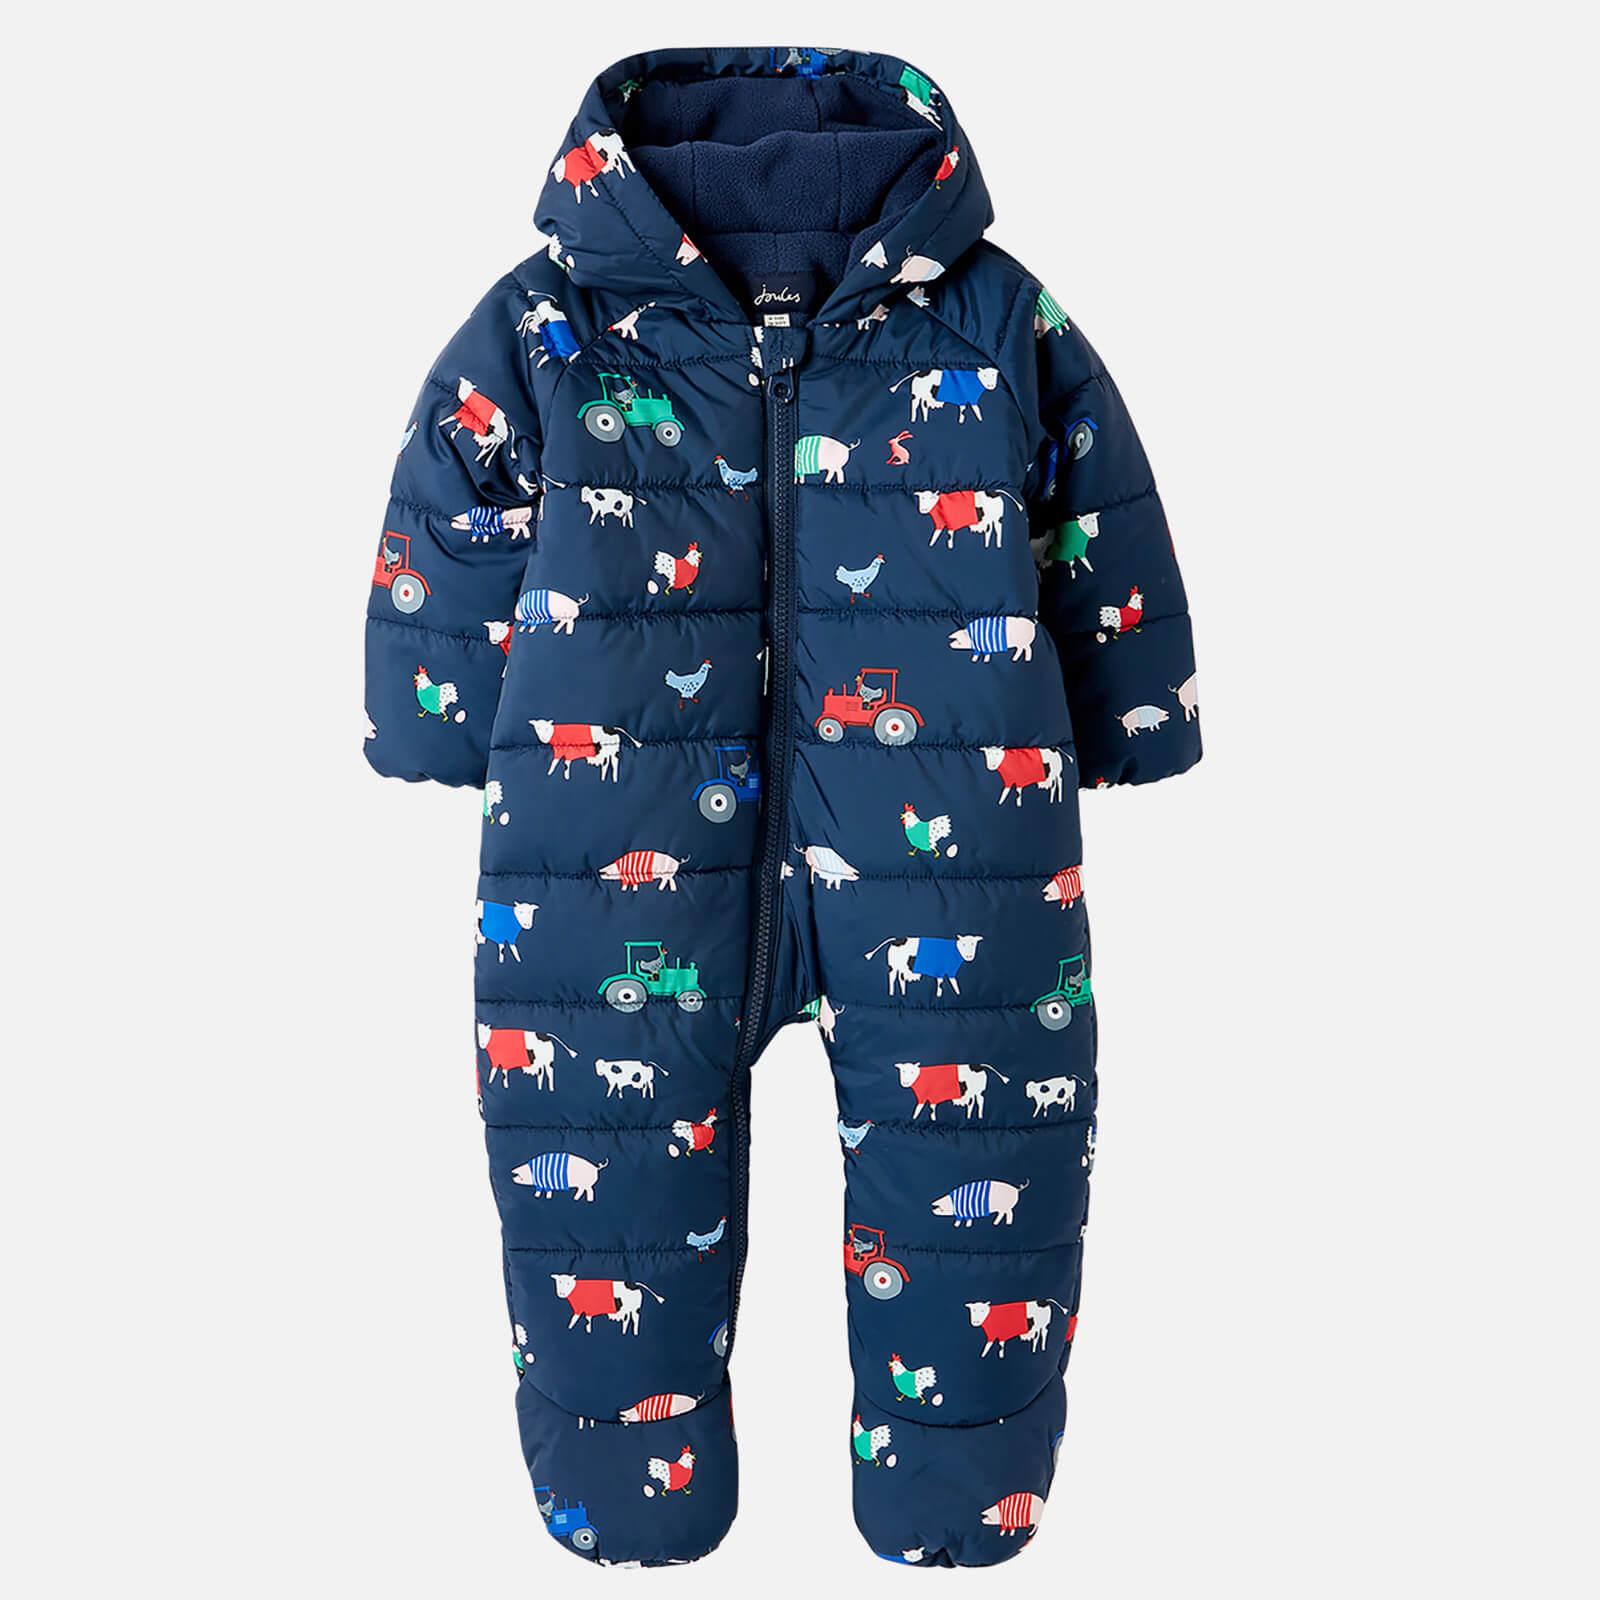 Joules Babys' Snuggle Animal Pramsuit - Navy - 18-24 months